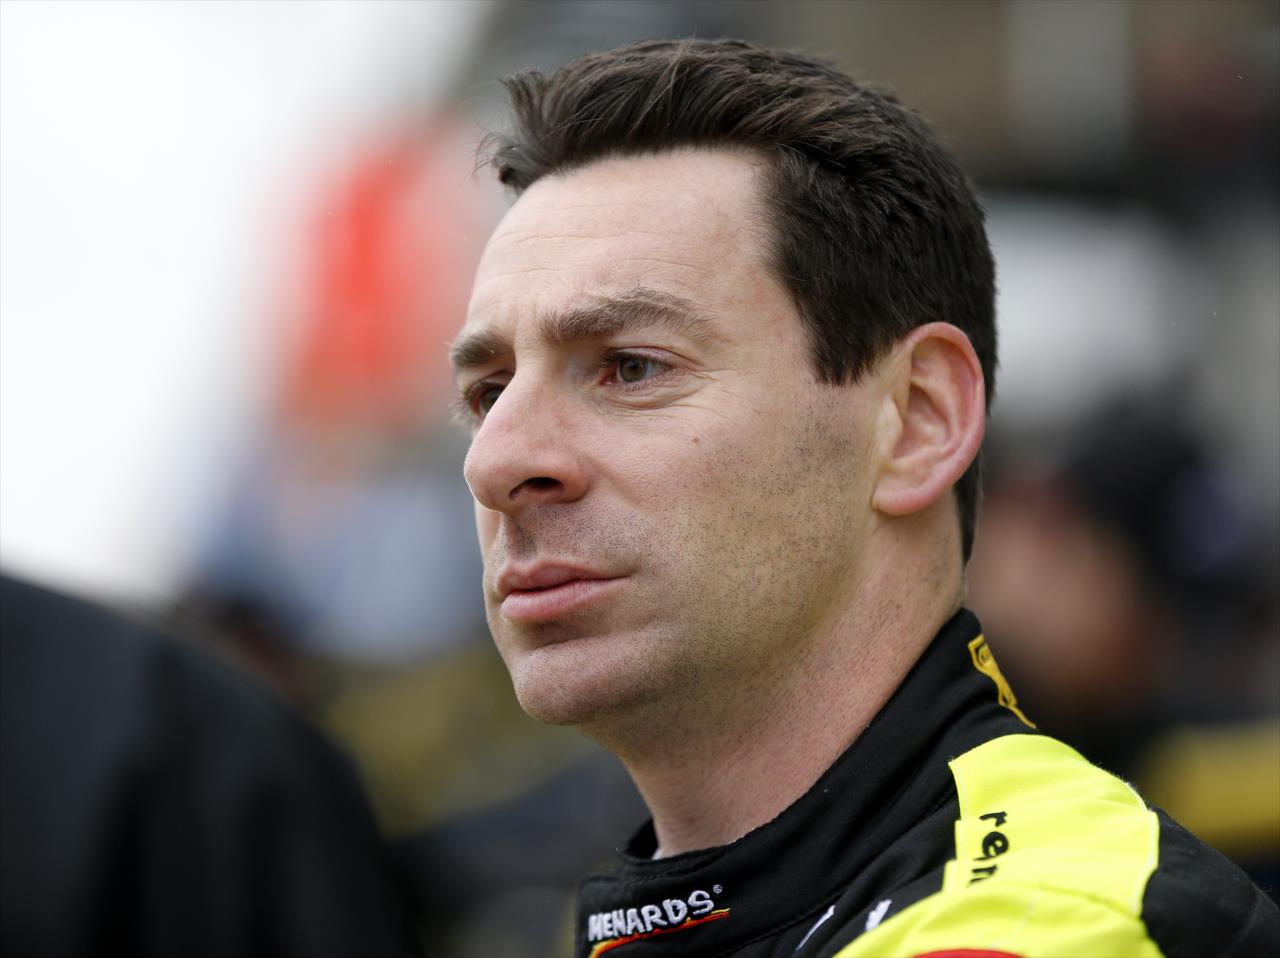 Simon Pagenaud during the Open Test at Circuit of The Americas in Austin, TX -- Photo by: Jonathan Ferrey (Getty Images)